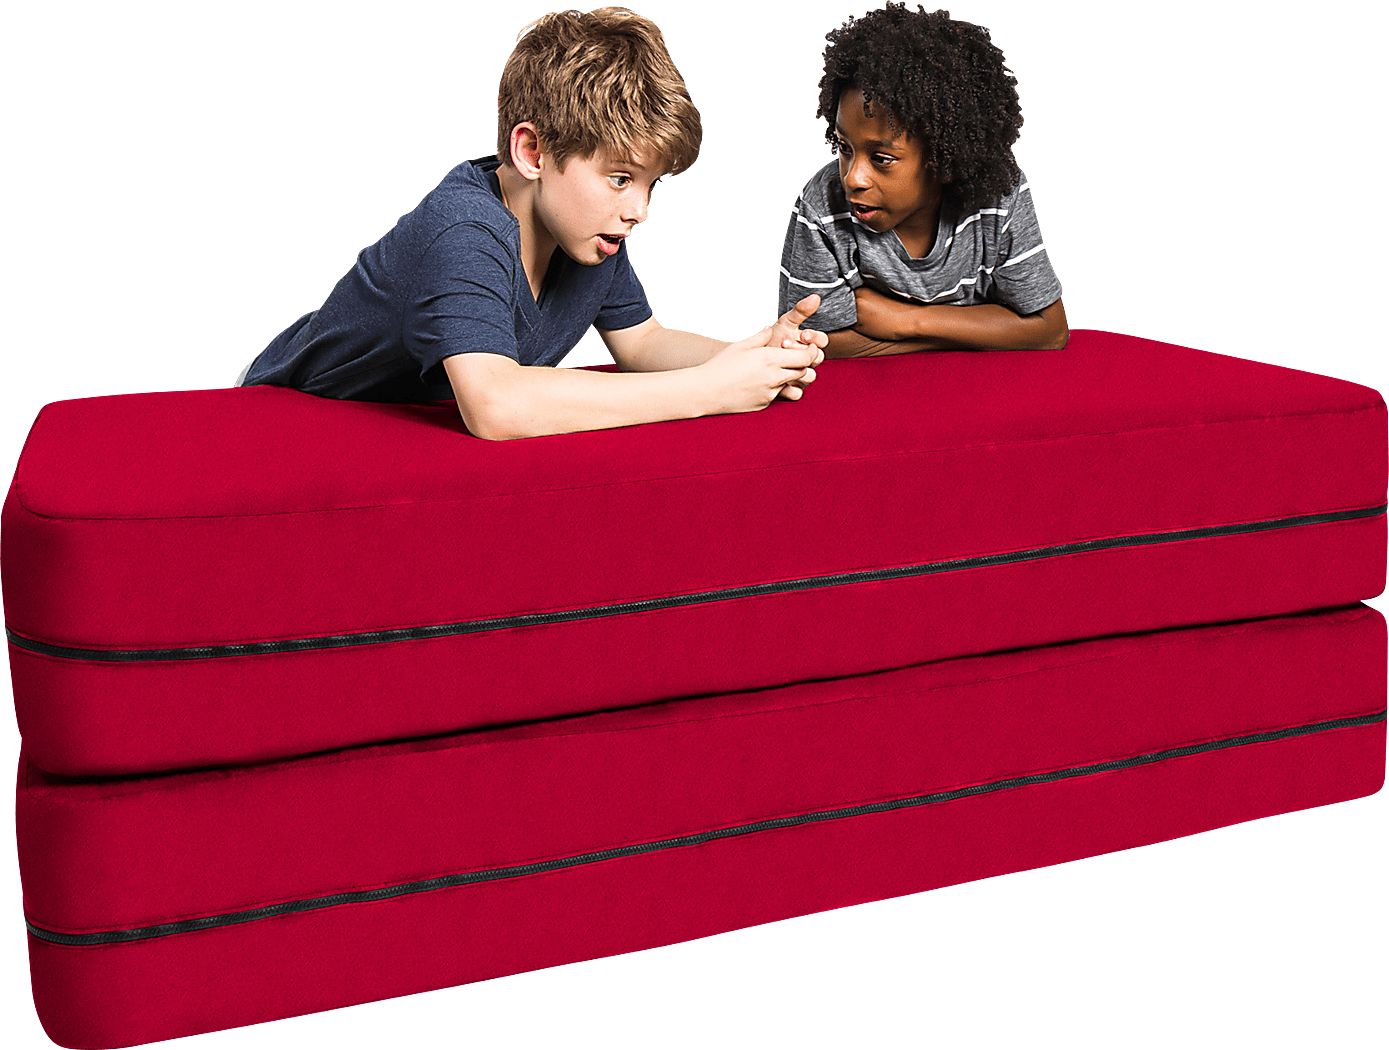 Kids Cubex Red Convertible Sofa and Ottoman